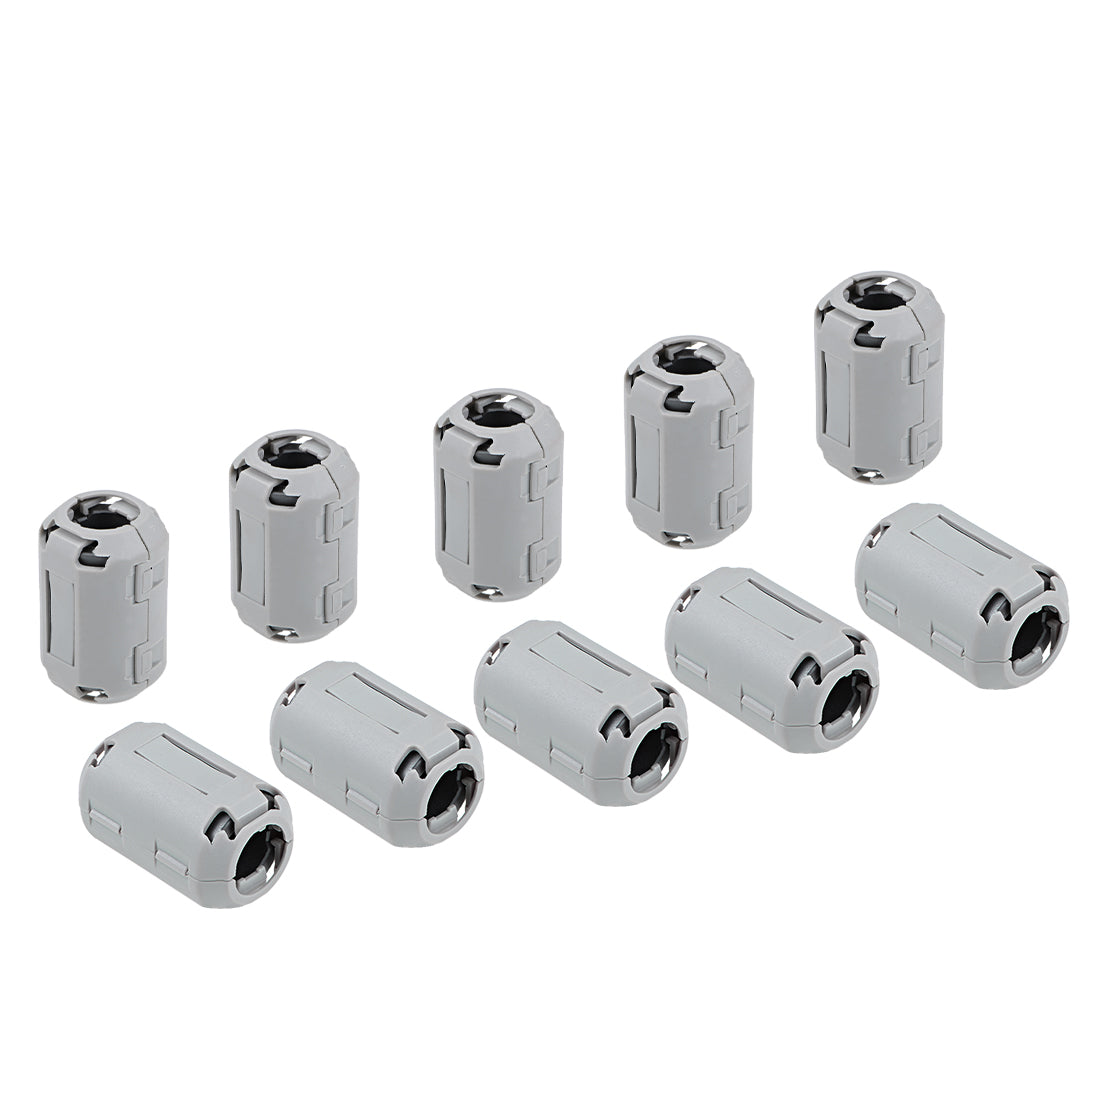 uxcell Uxcell 13mm Ferrite Cores Ring Clip-On RFI EMI Noise Suppression Cable Clip, Grey 10pcs